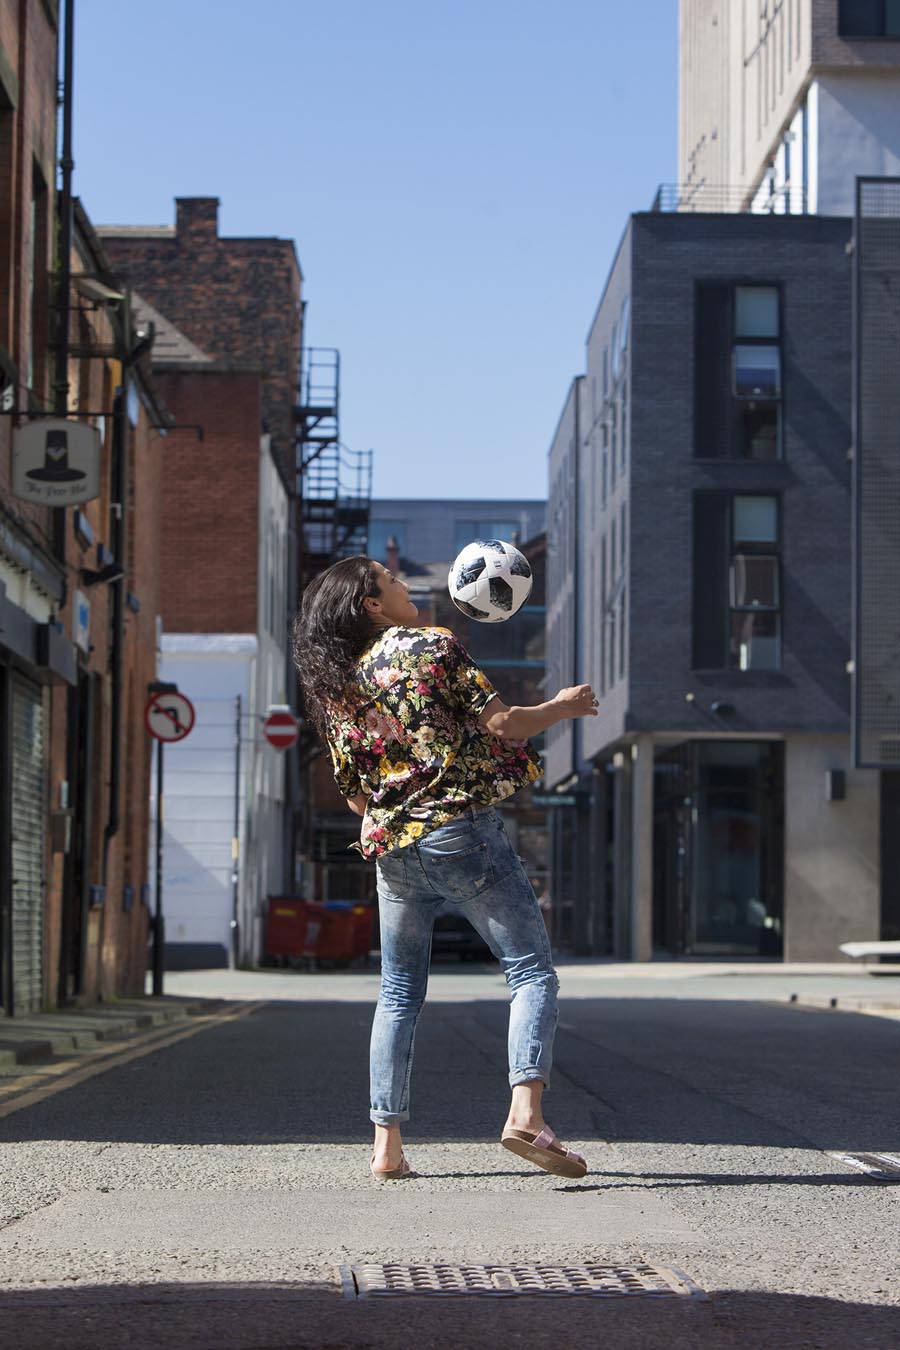  A portrait photograph of footballer Nadia Nadim.  Photographed for Scandinavian Airlines 